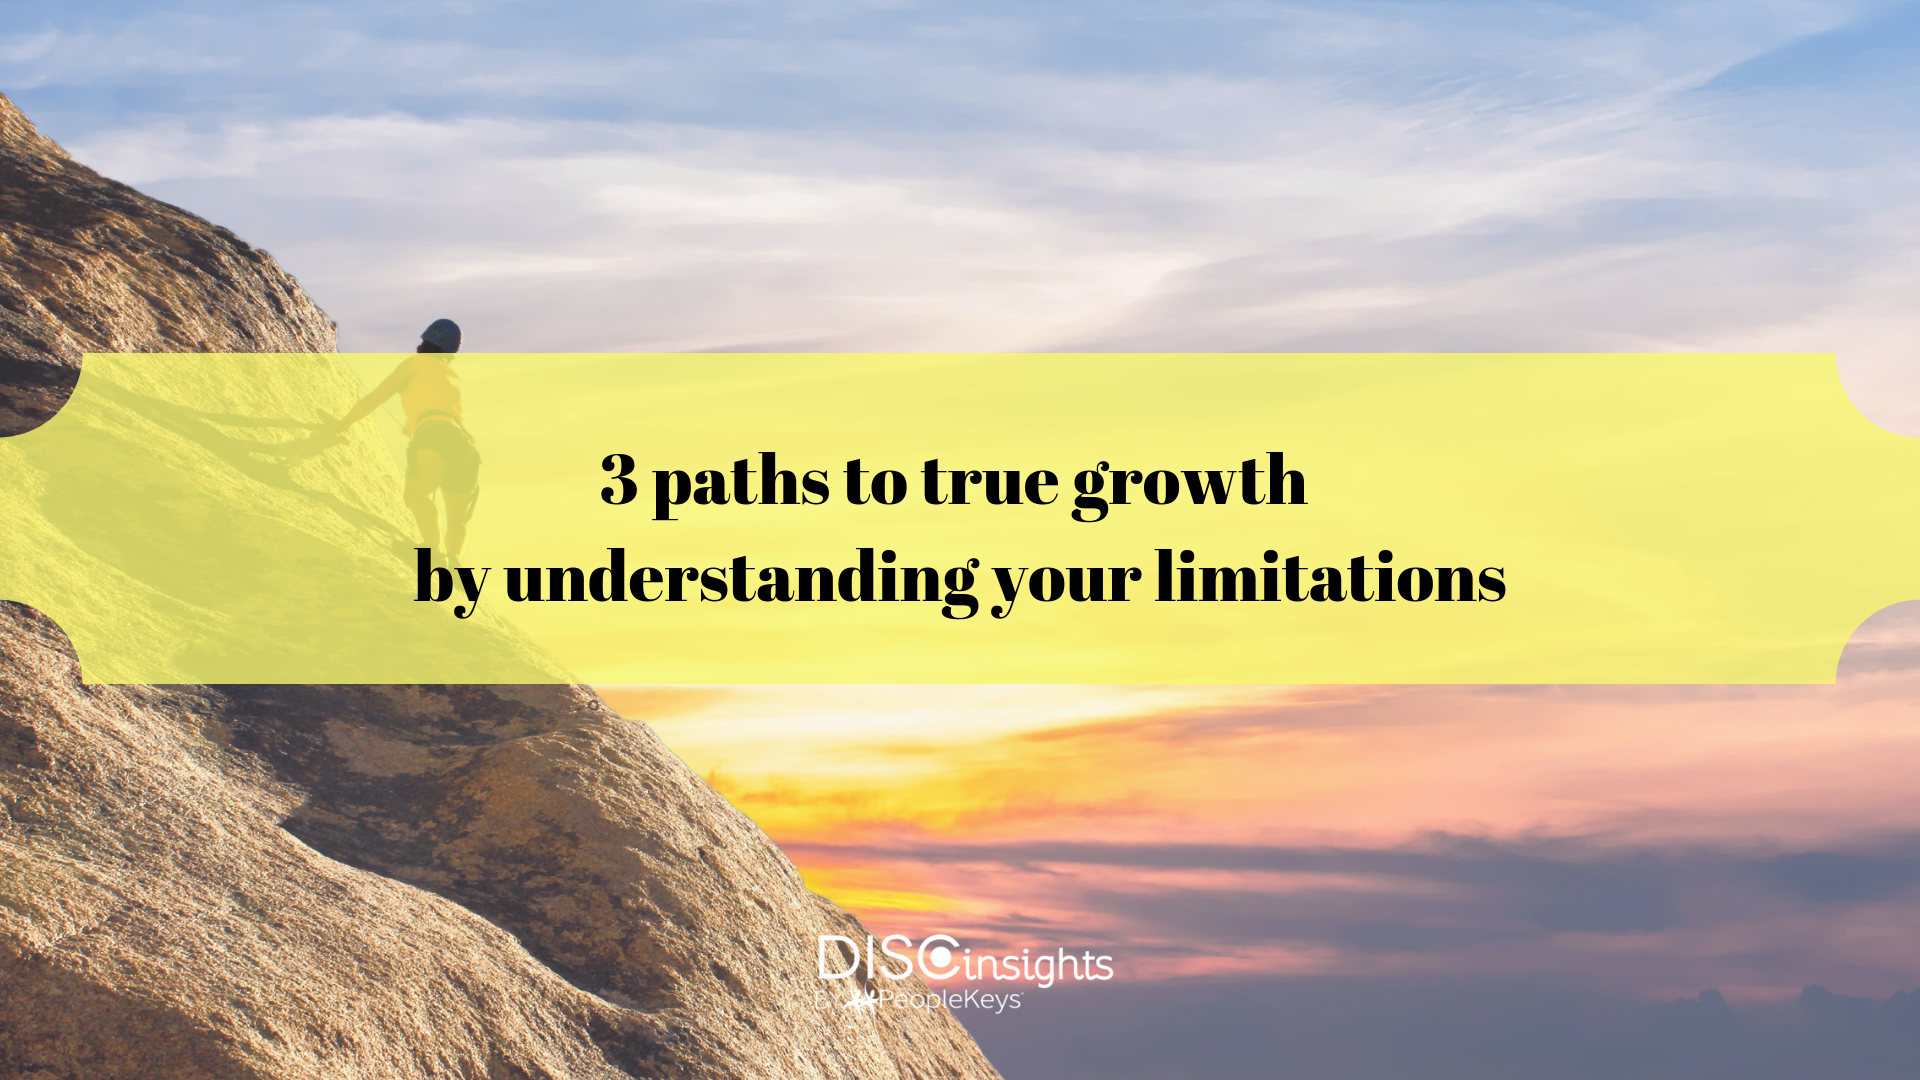 3 paths to true growth by understanding your limitations